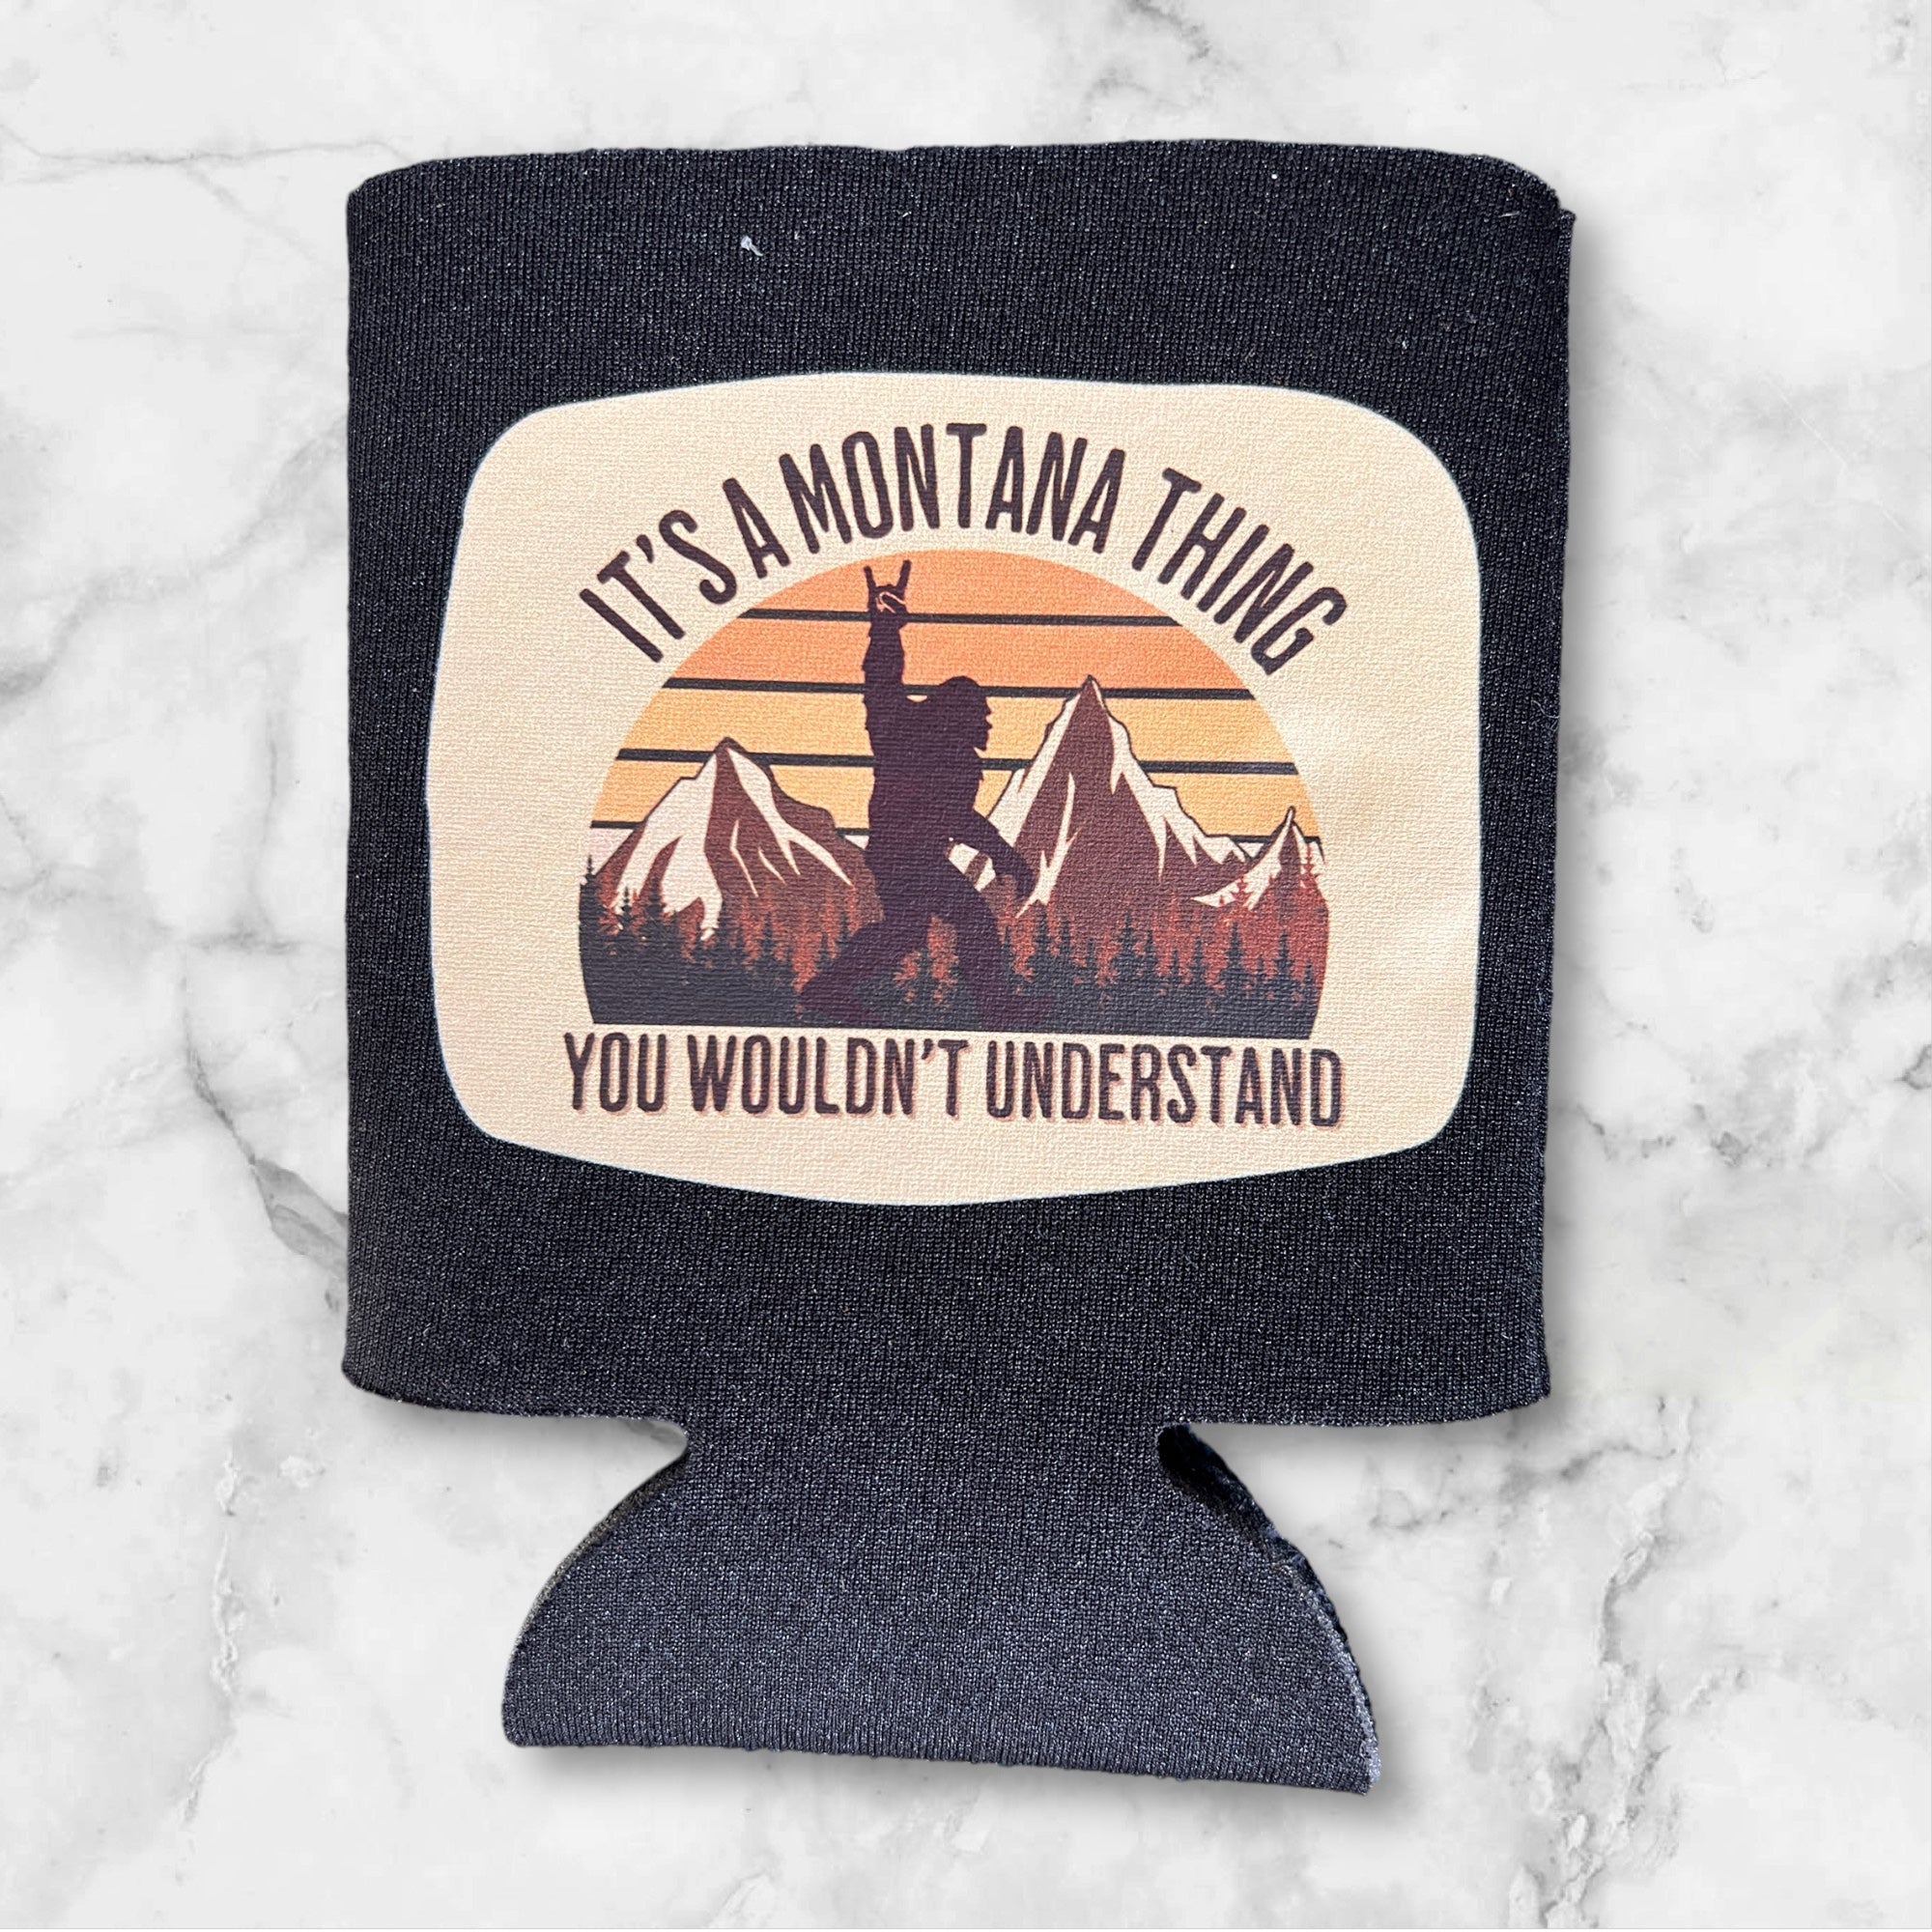 It's a Montana Thing, You Wouldn't Understand" Drink Koozie